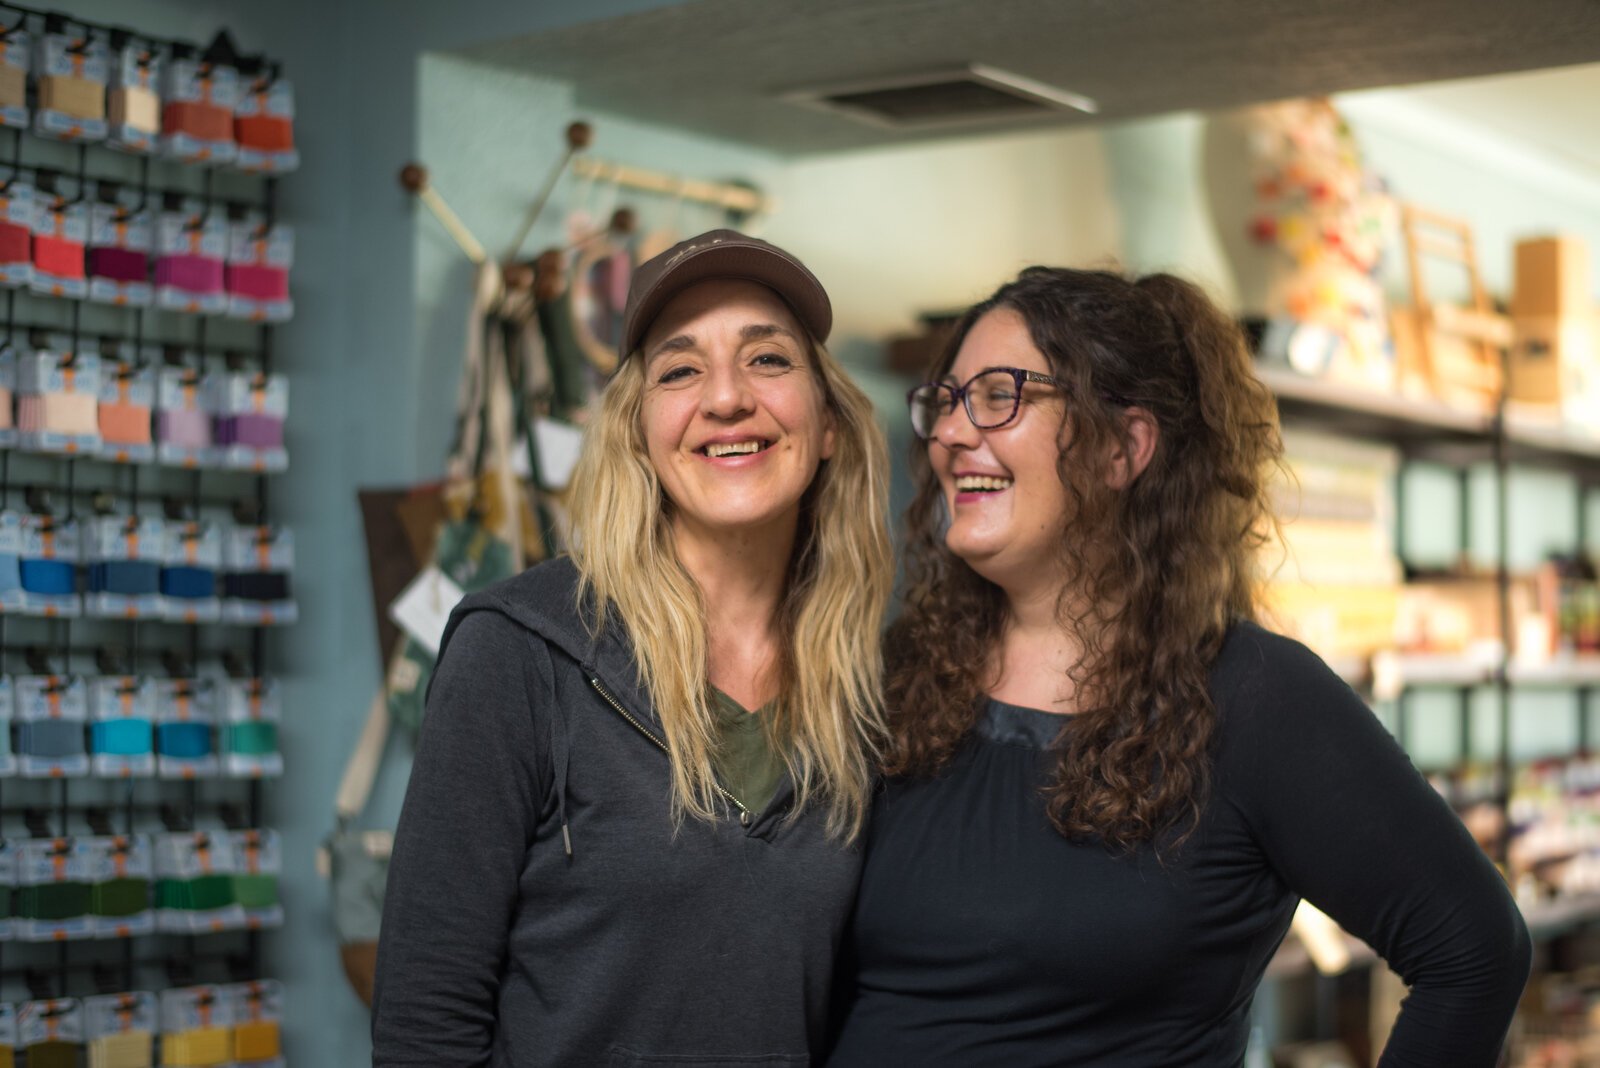 Jennifer Faketty, owner of Confections with Convictions, and sister Rebecca Macleery, owner of Kalamazoo Dry Goods, share a laugh.